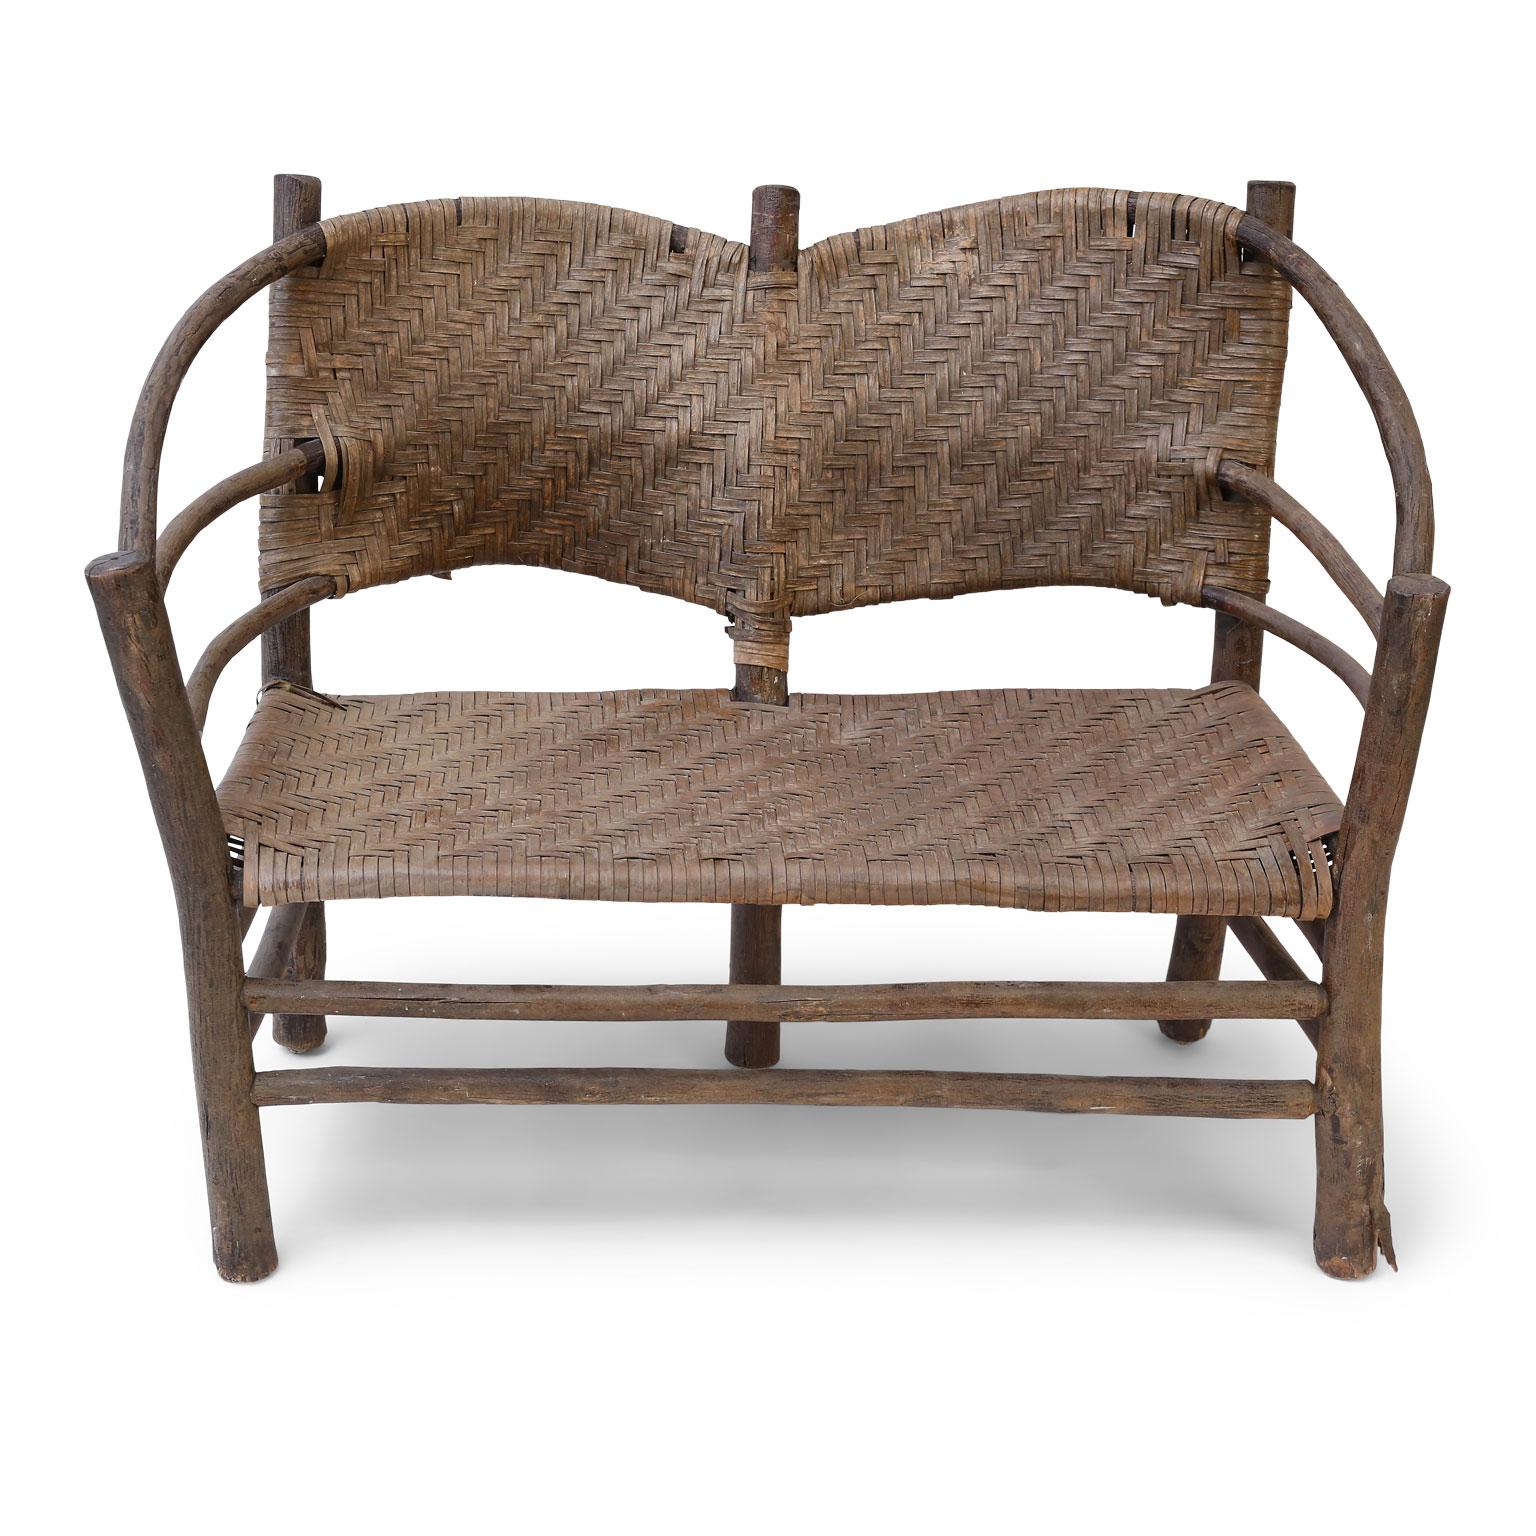 Old Hickory barrel-back settee with a bent hickory frame and a woven splint seat and back.

Note: Regional differences in humidity and climate during shipping may cause antique and vintage wood to shrink and/or split along its grain, veneer to